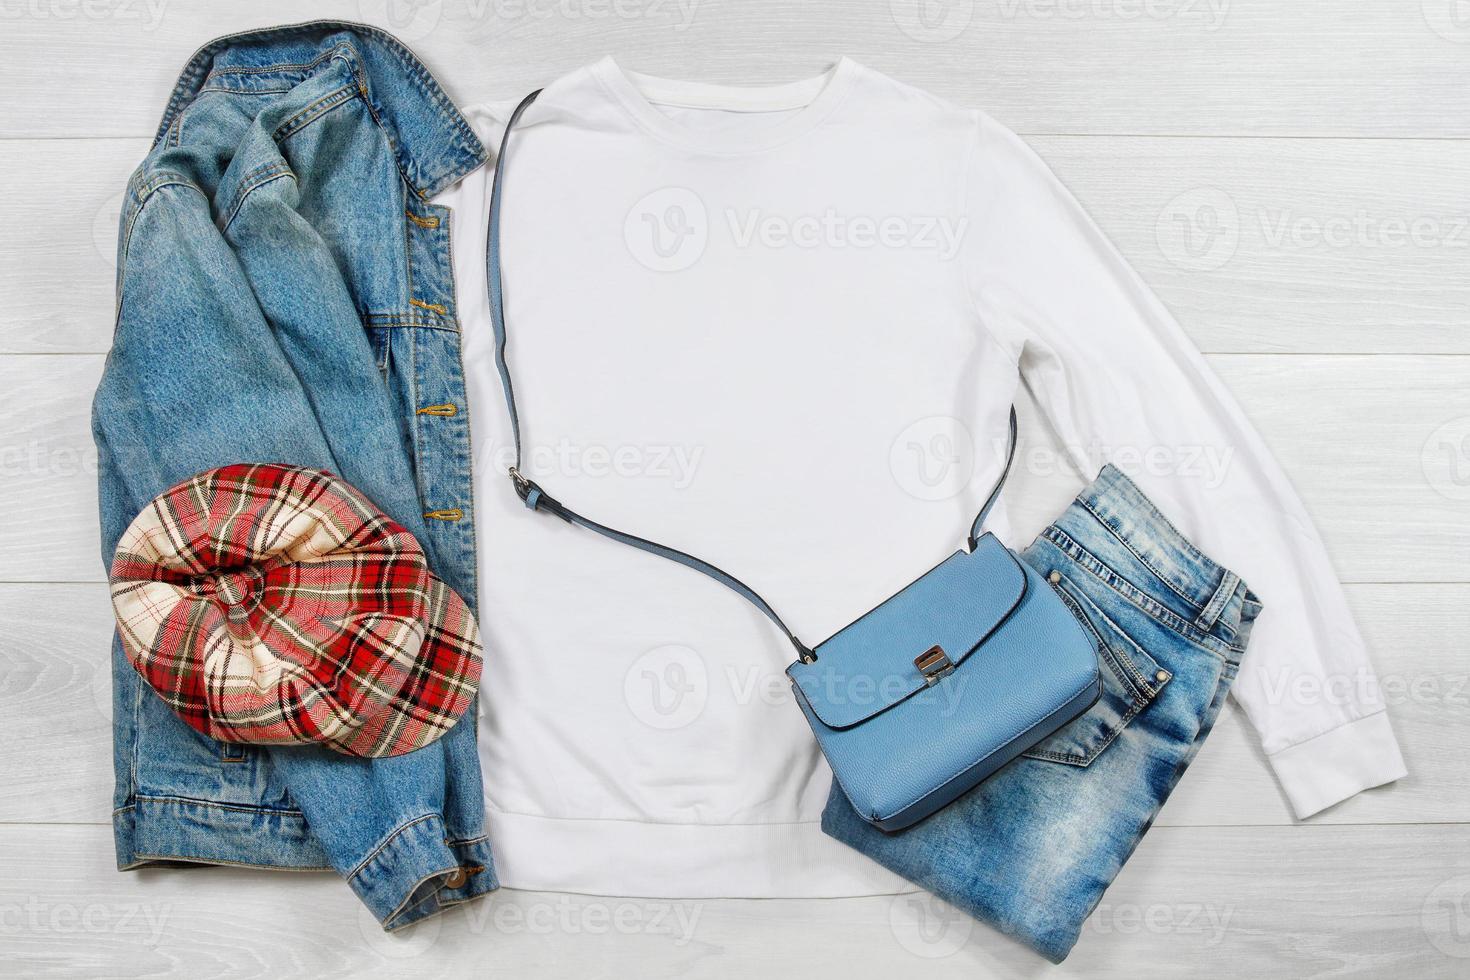 White Sweatshirt mockup. Template blank shirt top view on white wooden background. Winter outfit on wood floor. Woman fashion clothes. Spring look of today. Female Jeans, hat, bag accessories photo